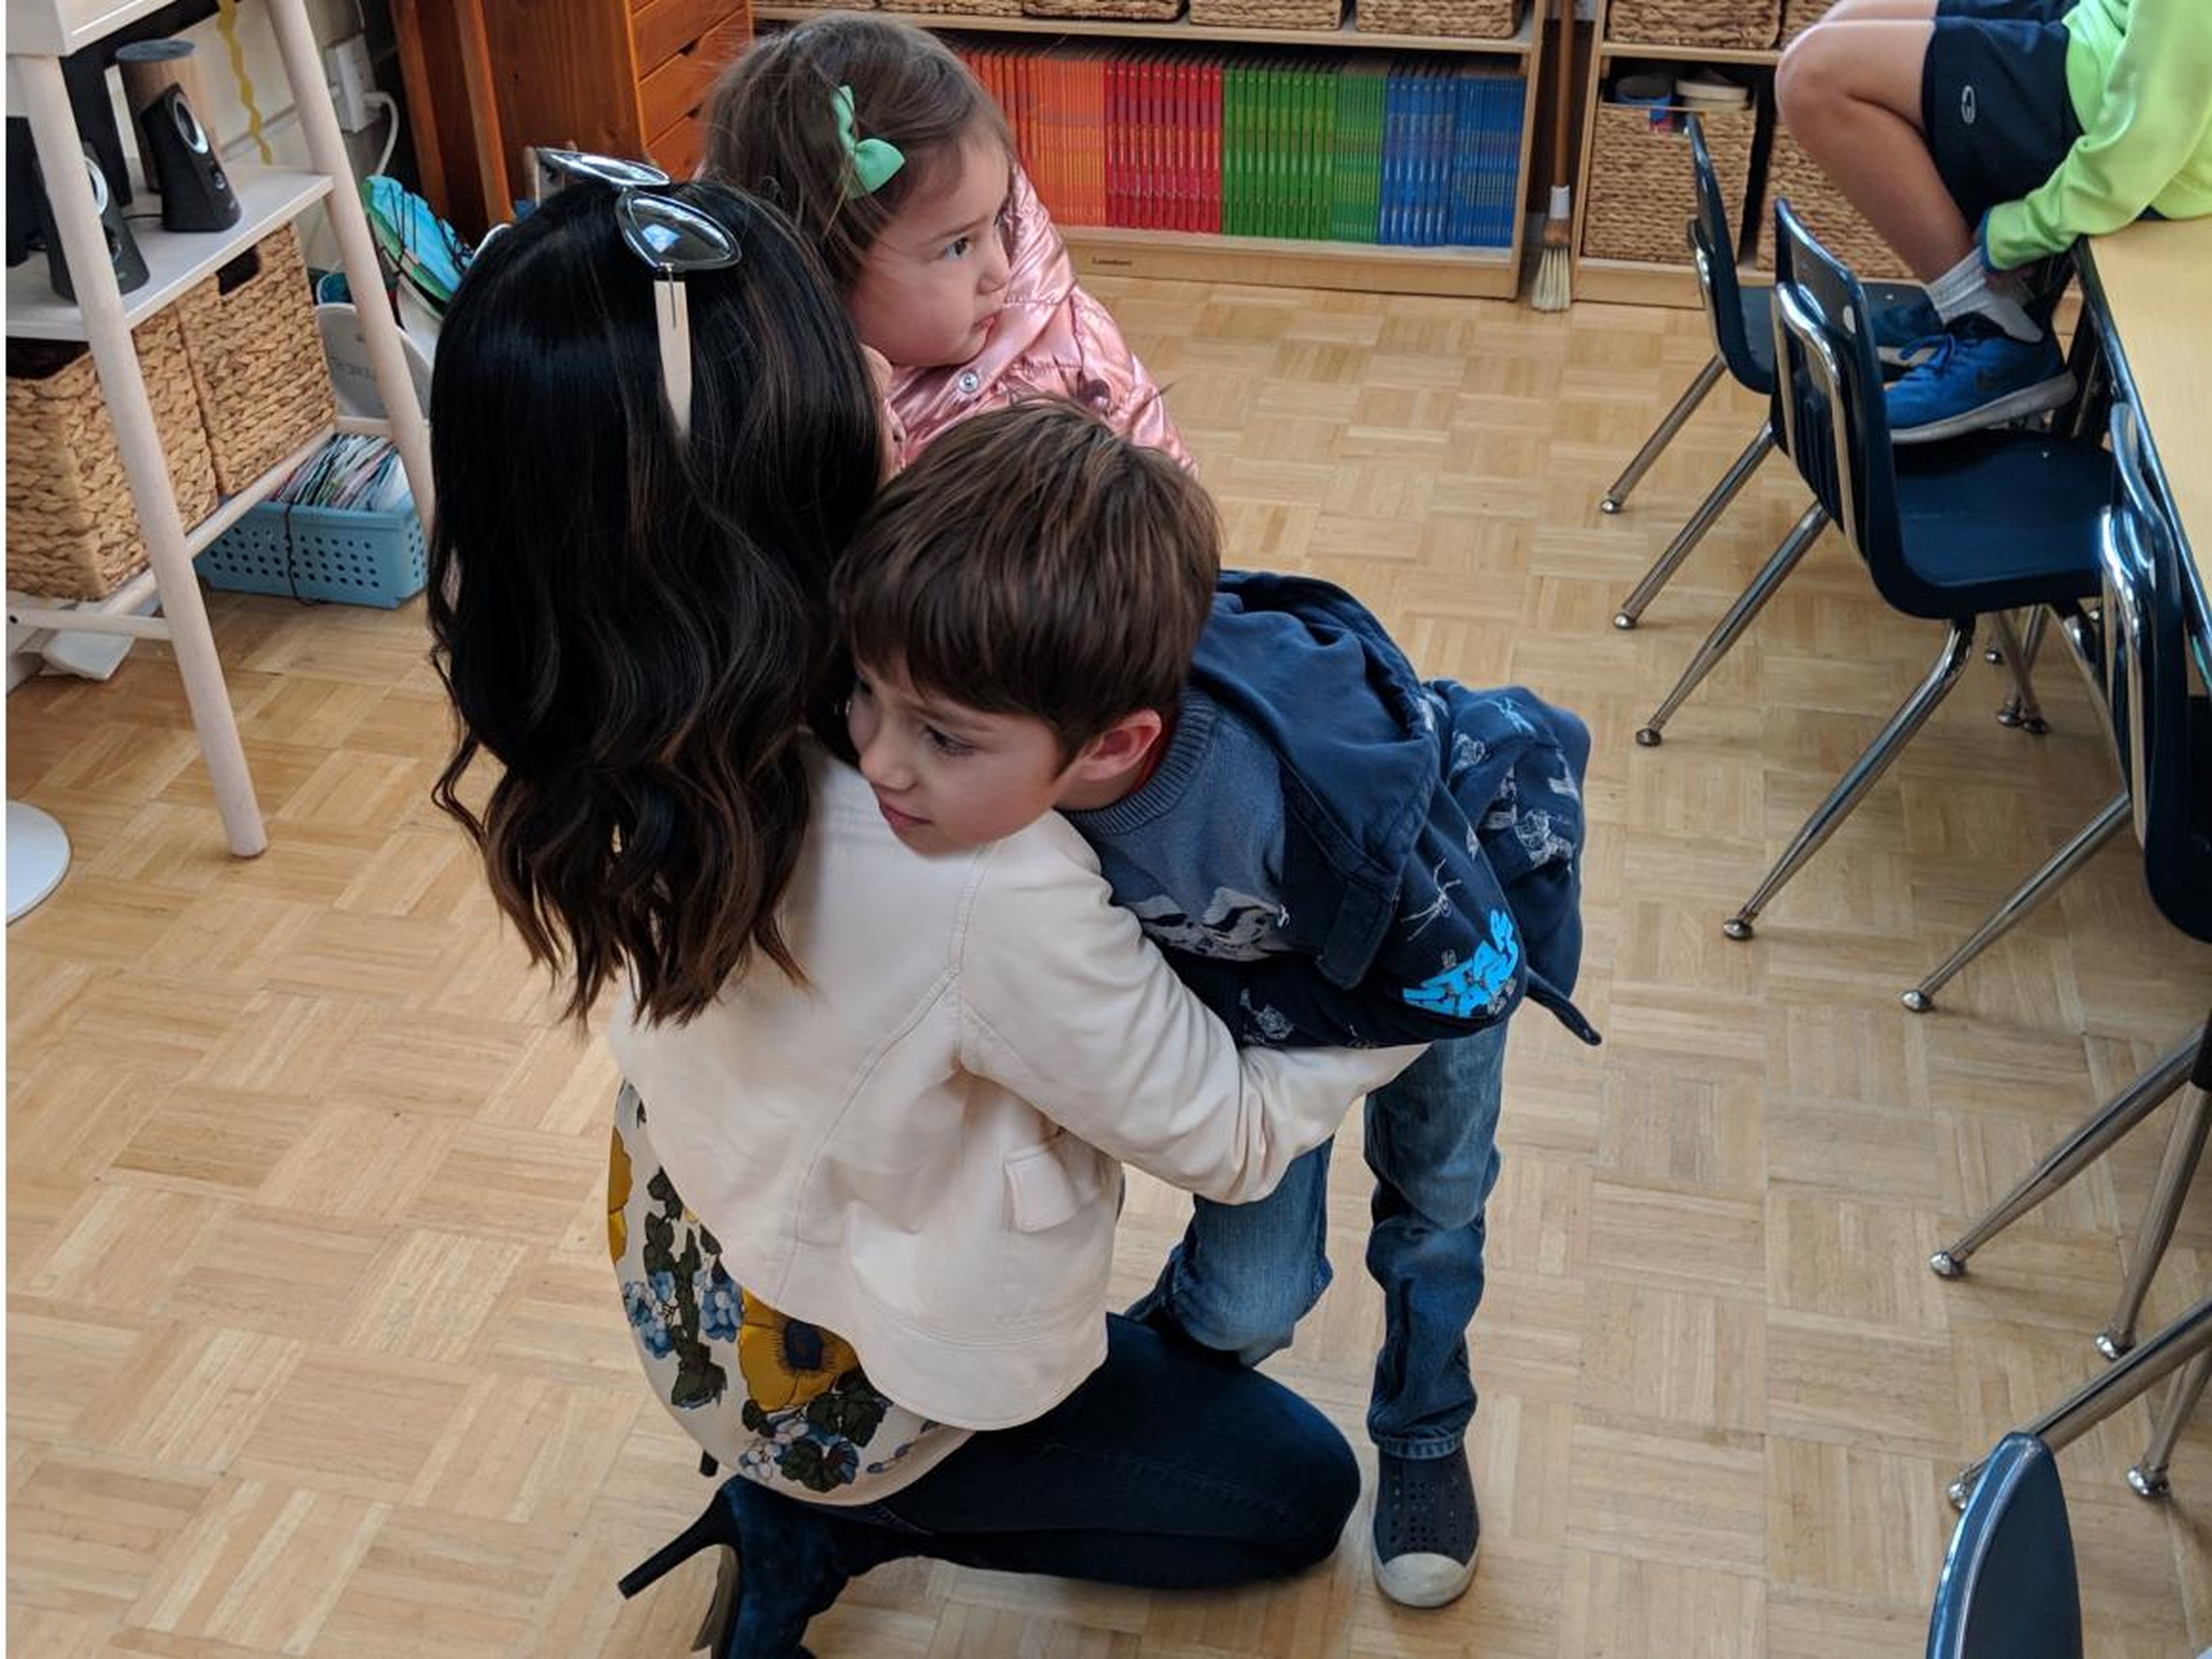 She says goodbye to her children and then continues her commute to the Google campus in Mountain View. "I'm lucky Hudson still likes giving me hugs," Rincon said.